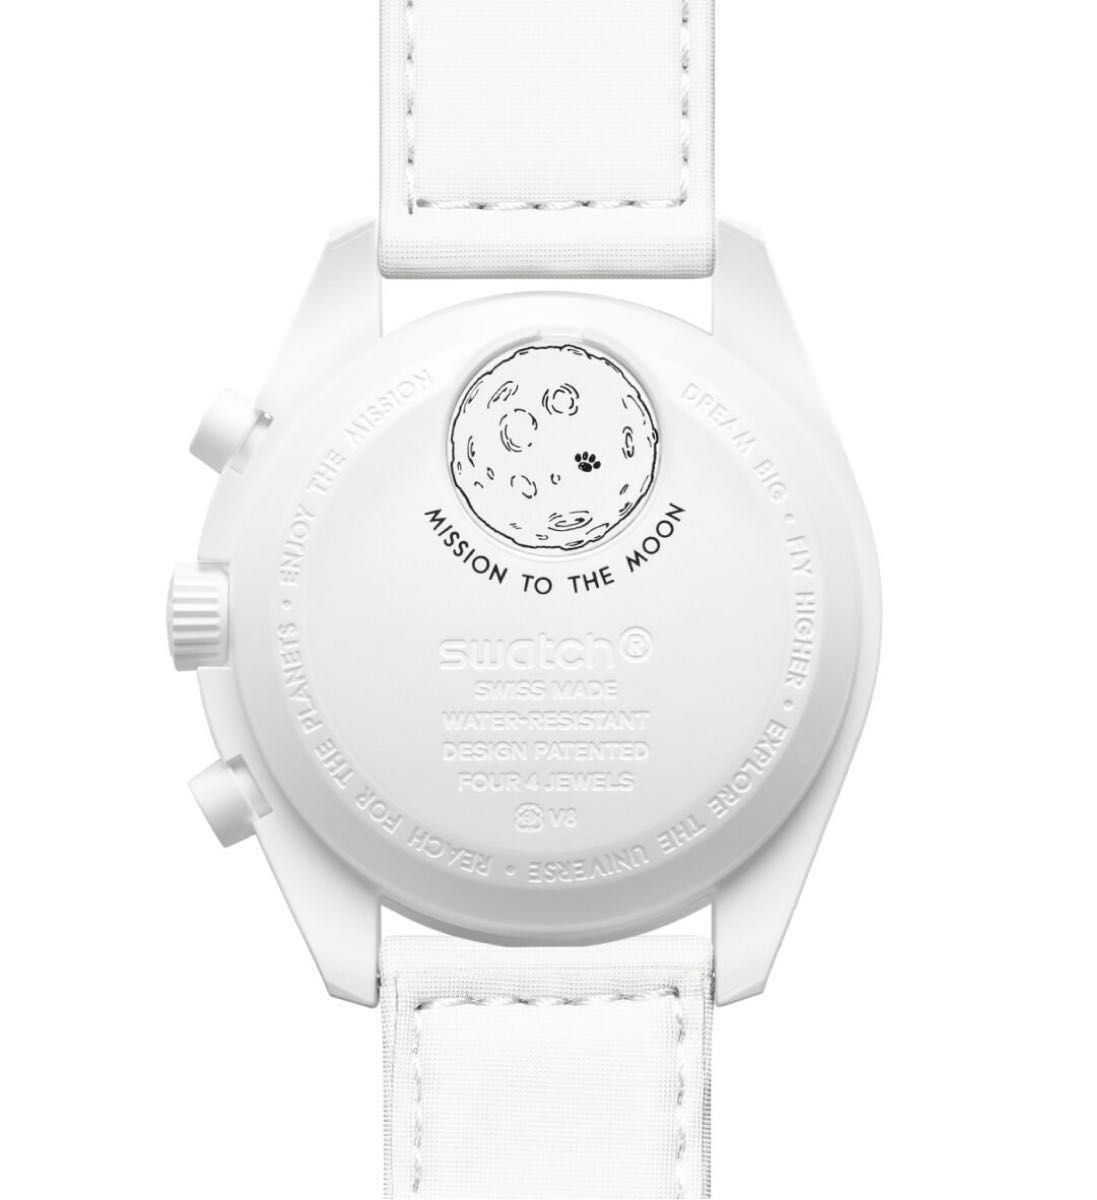 Snoopy x OMEGA x Swatch MoonSwatch White